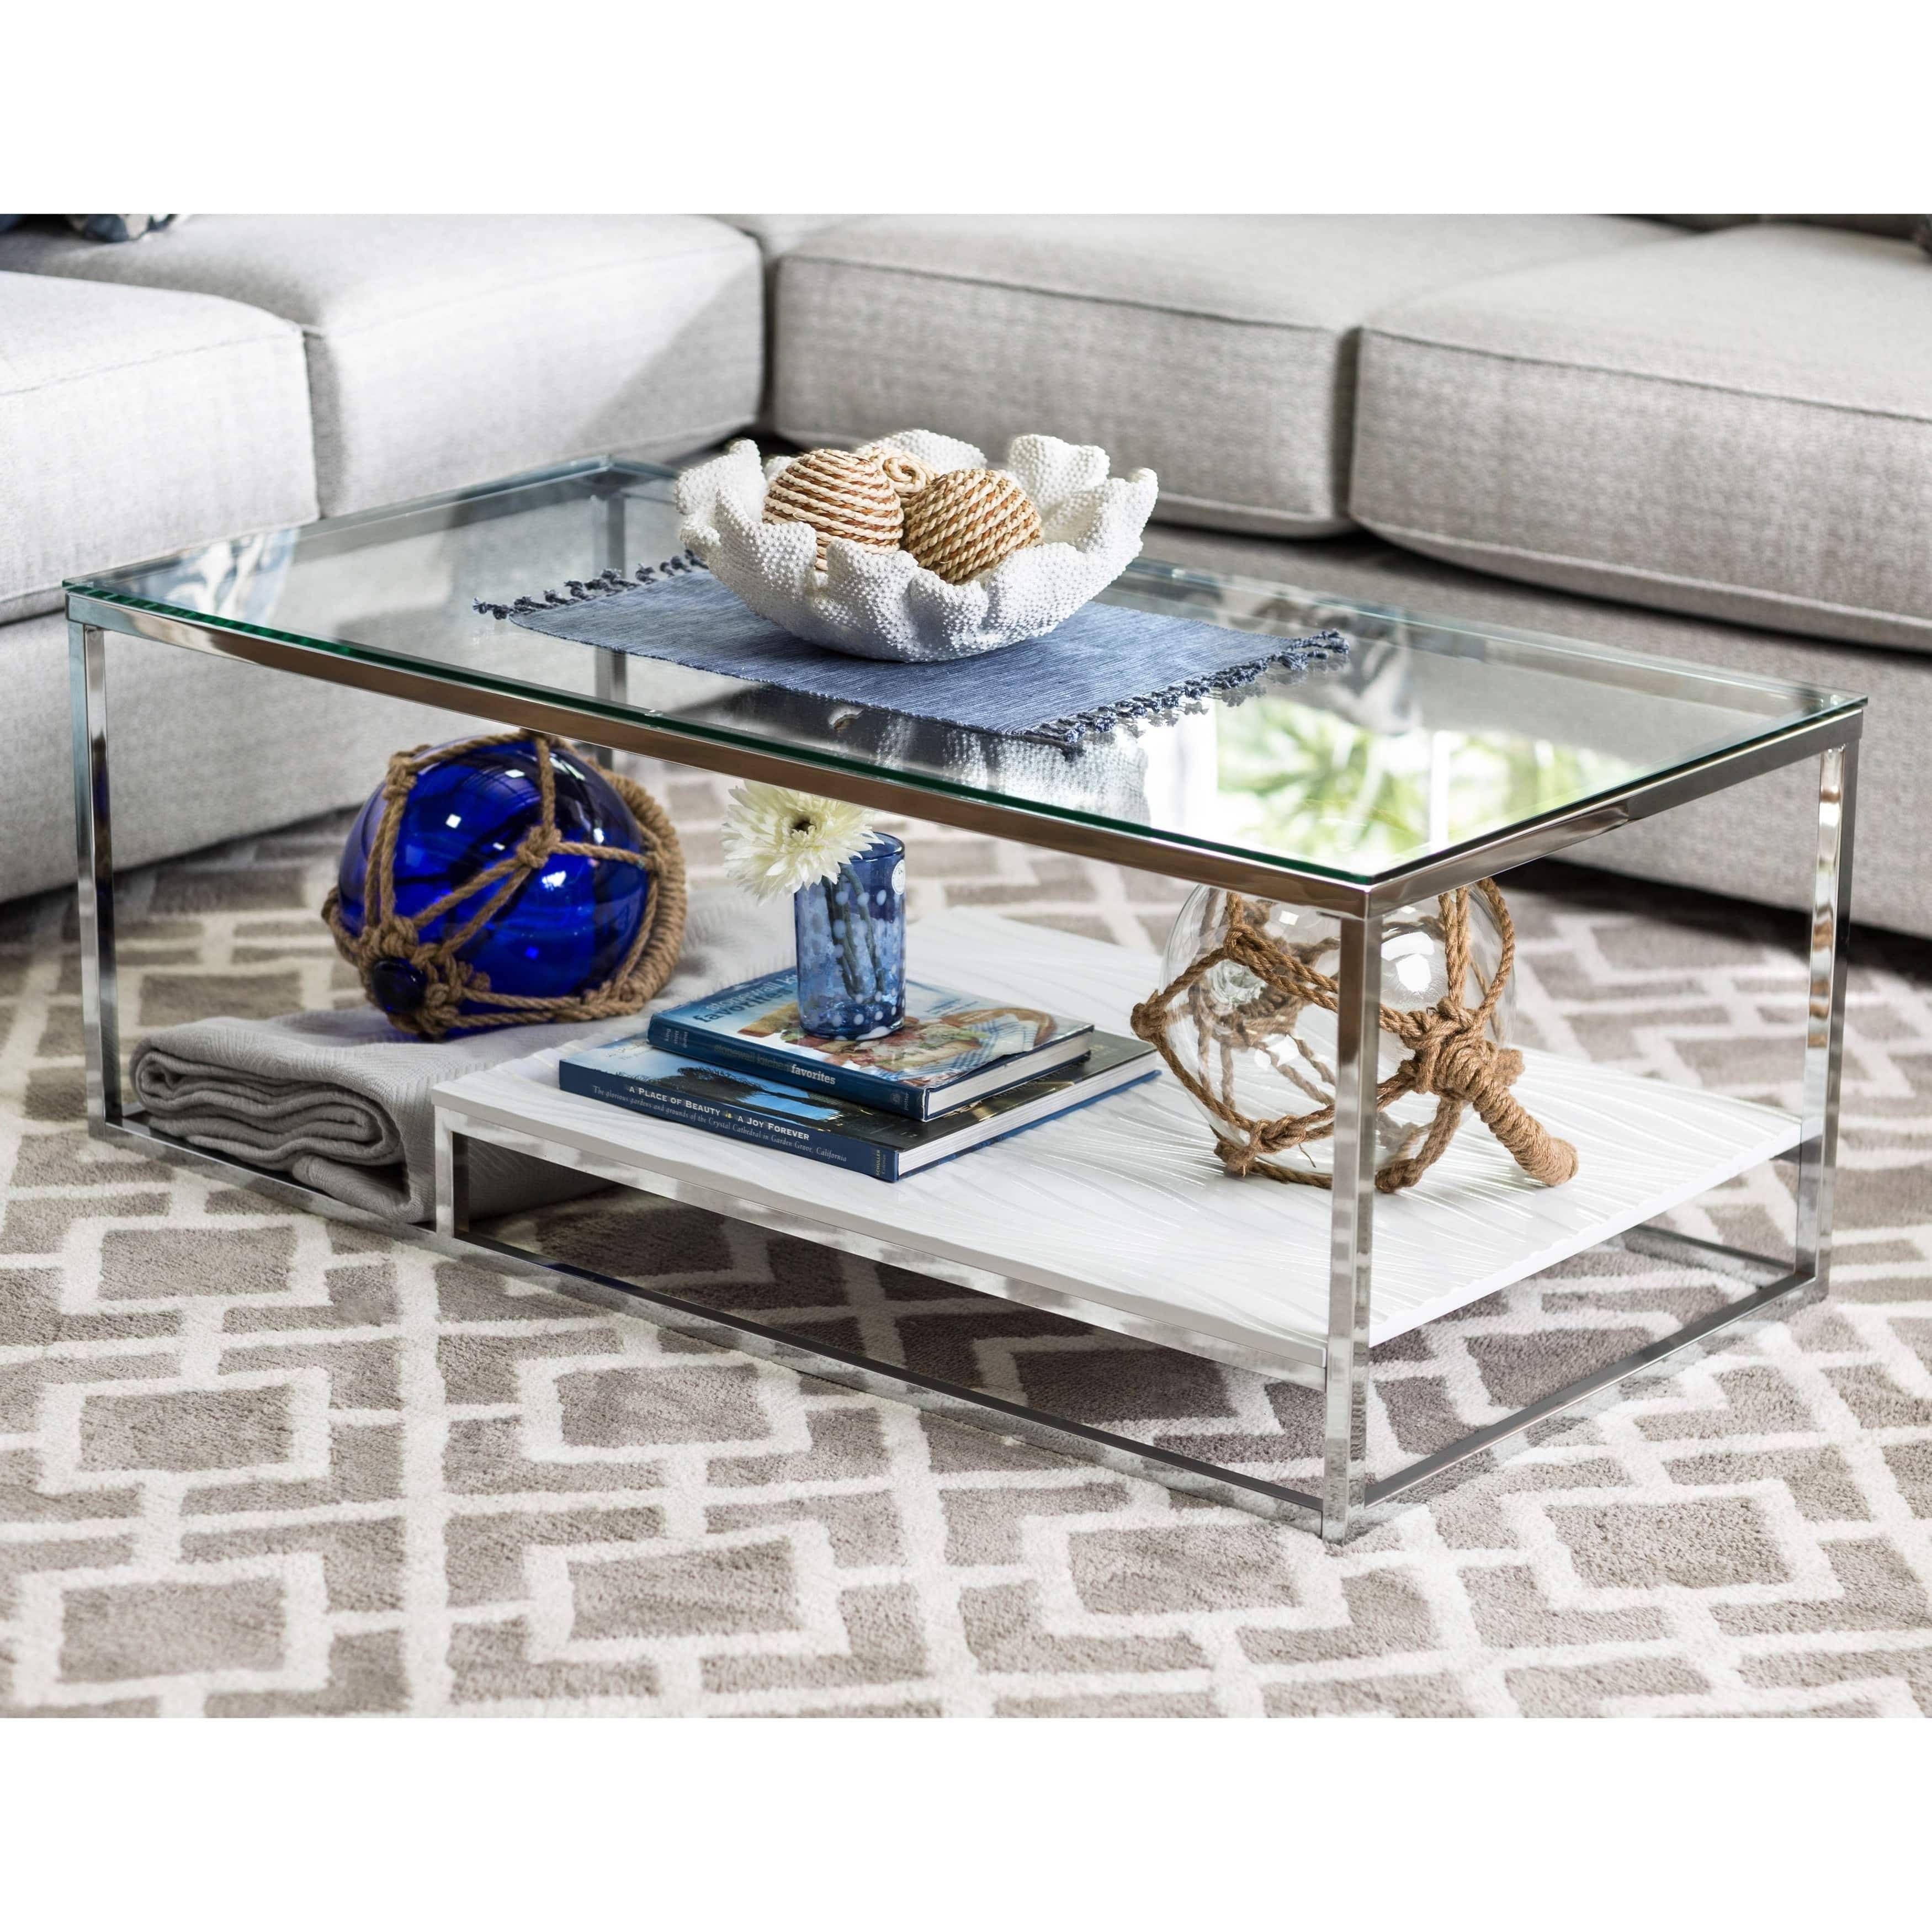 Furniture Of America Deitie Modern Chrome Coffee Table | Ebay With Regard To Modern Chrome Coffee Tables (View 25 of 30)